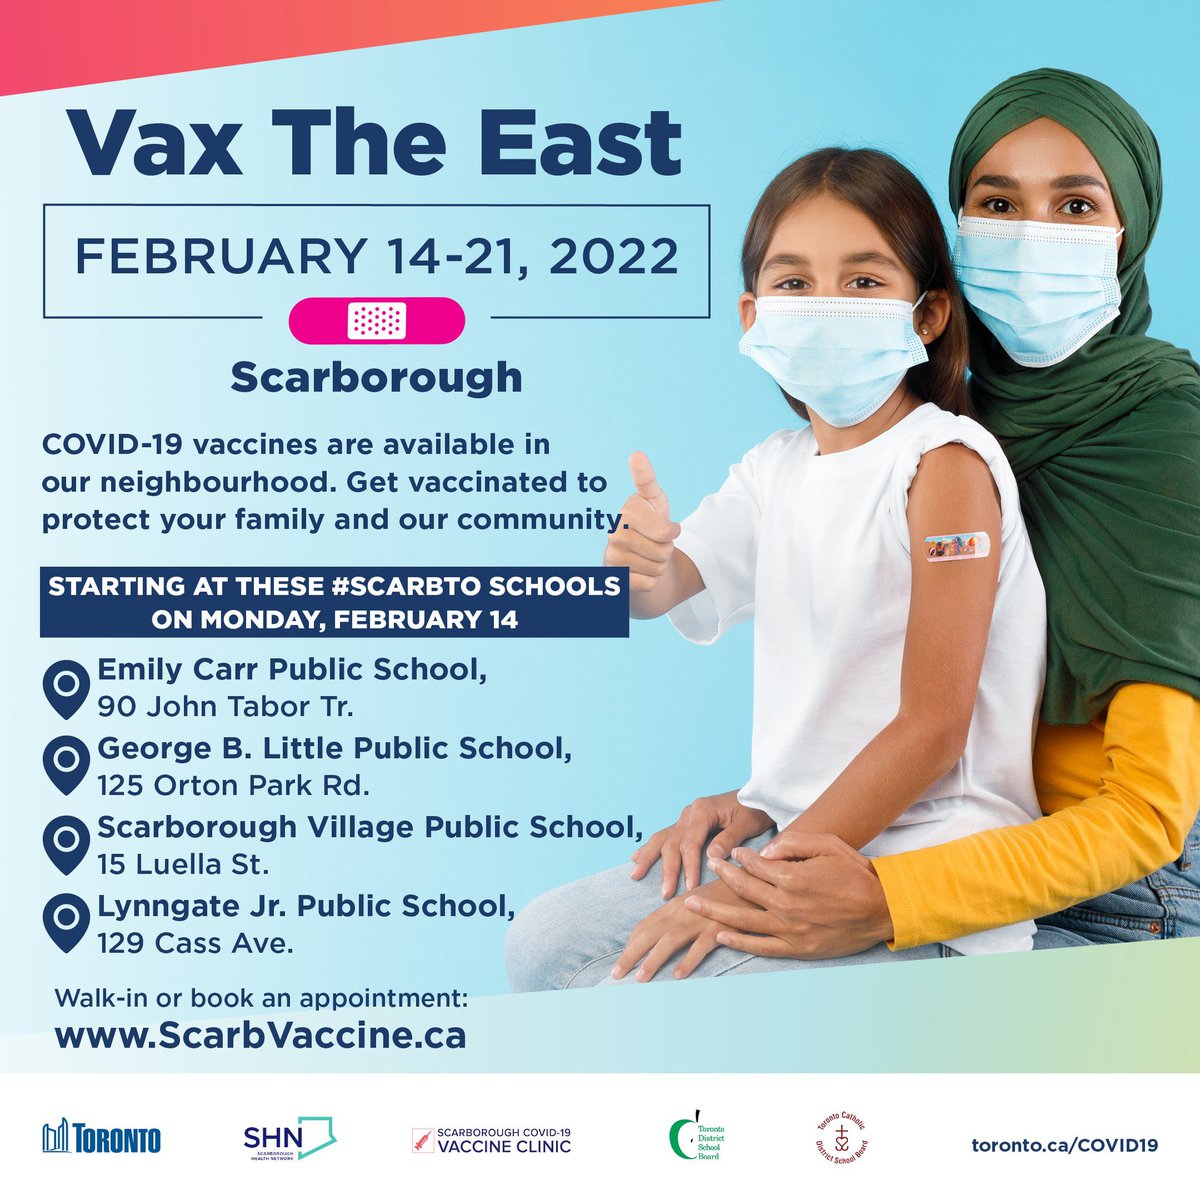 Happy Valentine’s Day, #ScarbTO! Kicking off #VaxTheEast at these schools, TODAY from 4-7PM:

📍Emily Carr PS
📍George B. Little PS
📍Scarborough Village PS
📍Lynngate Jr. PS

Walk-in or book an appointment: ScarbVaccine.ca

#VaxTO #Ward24 #ScarbTO #TOpoli @cllrainslie